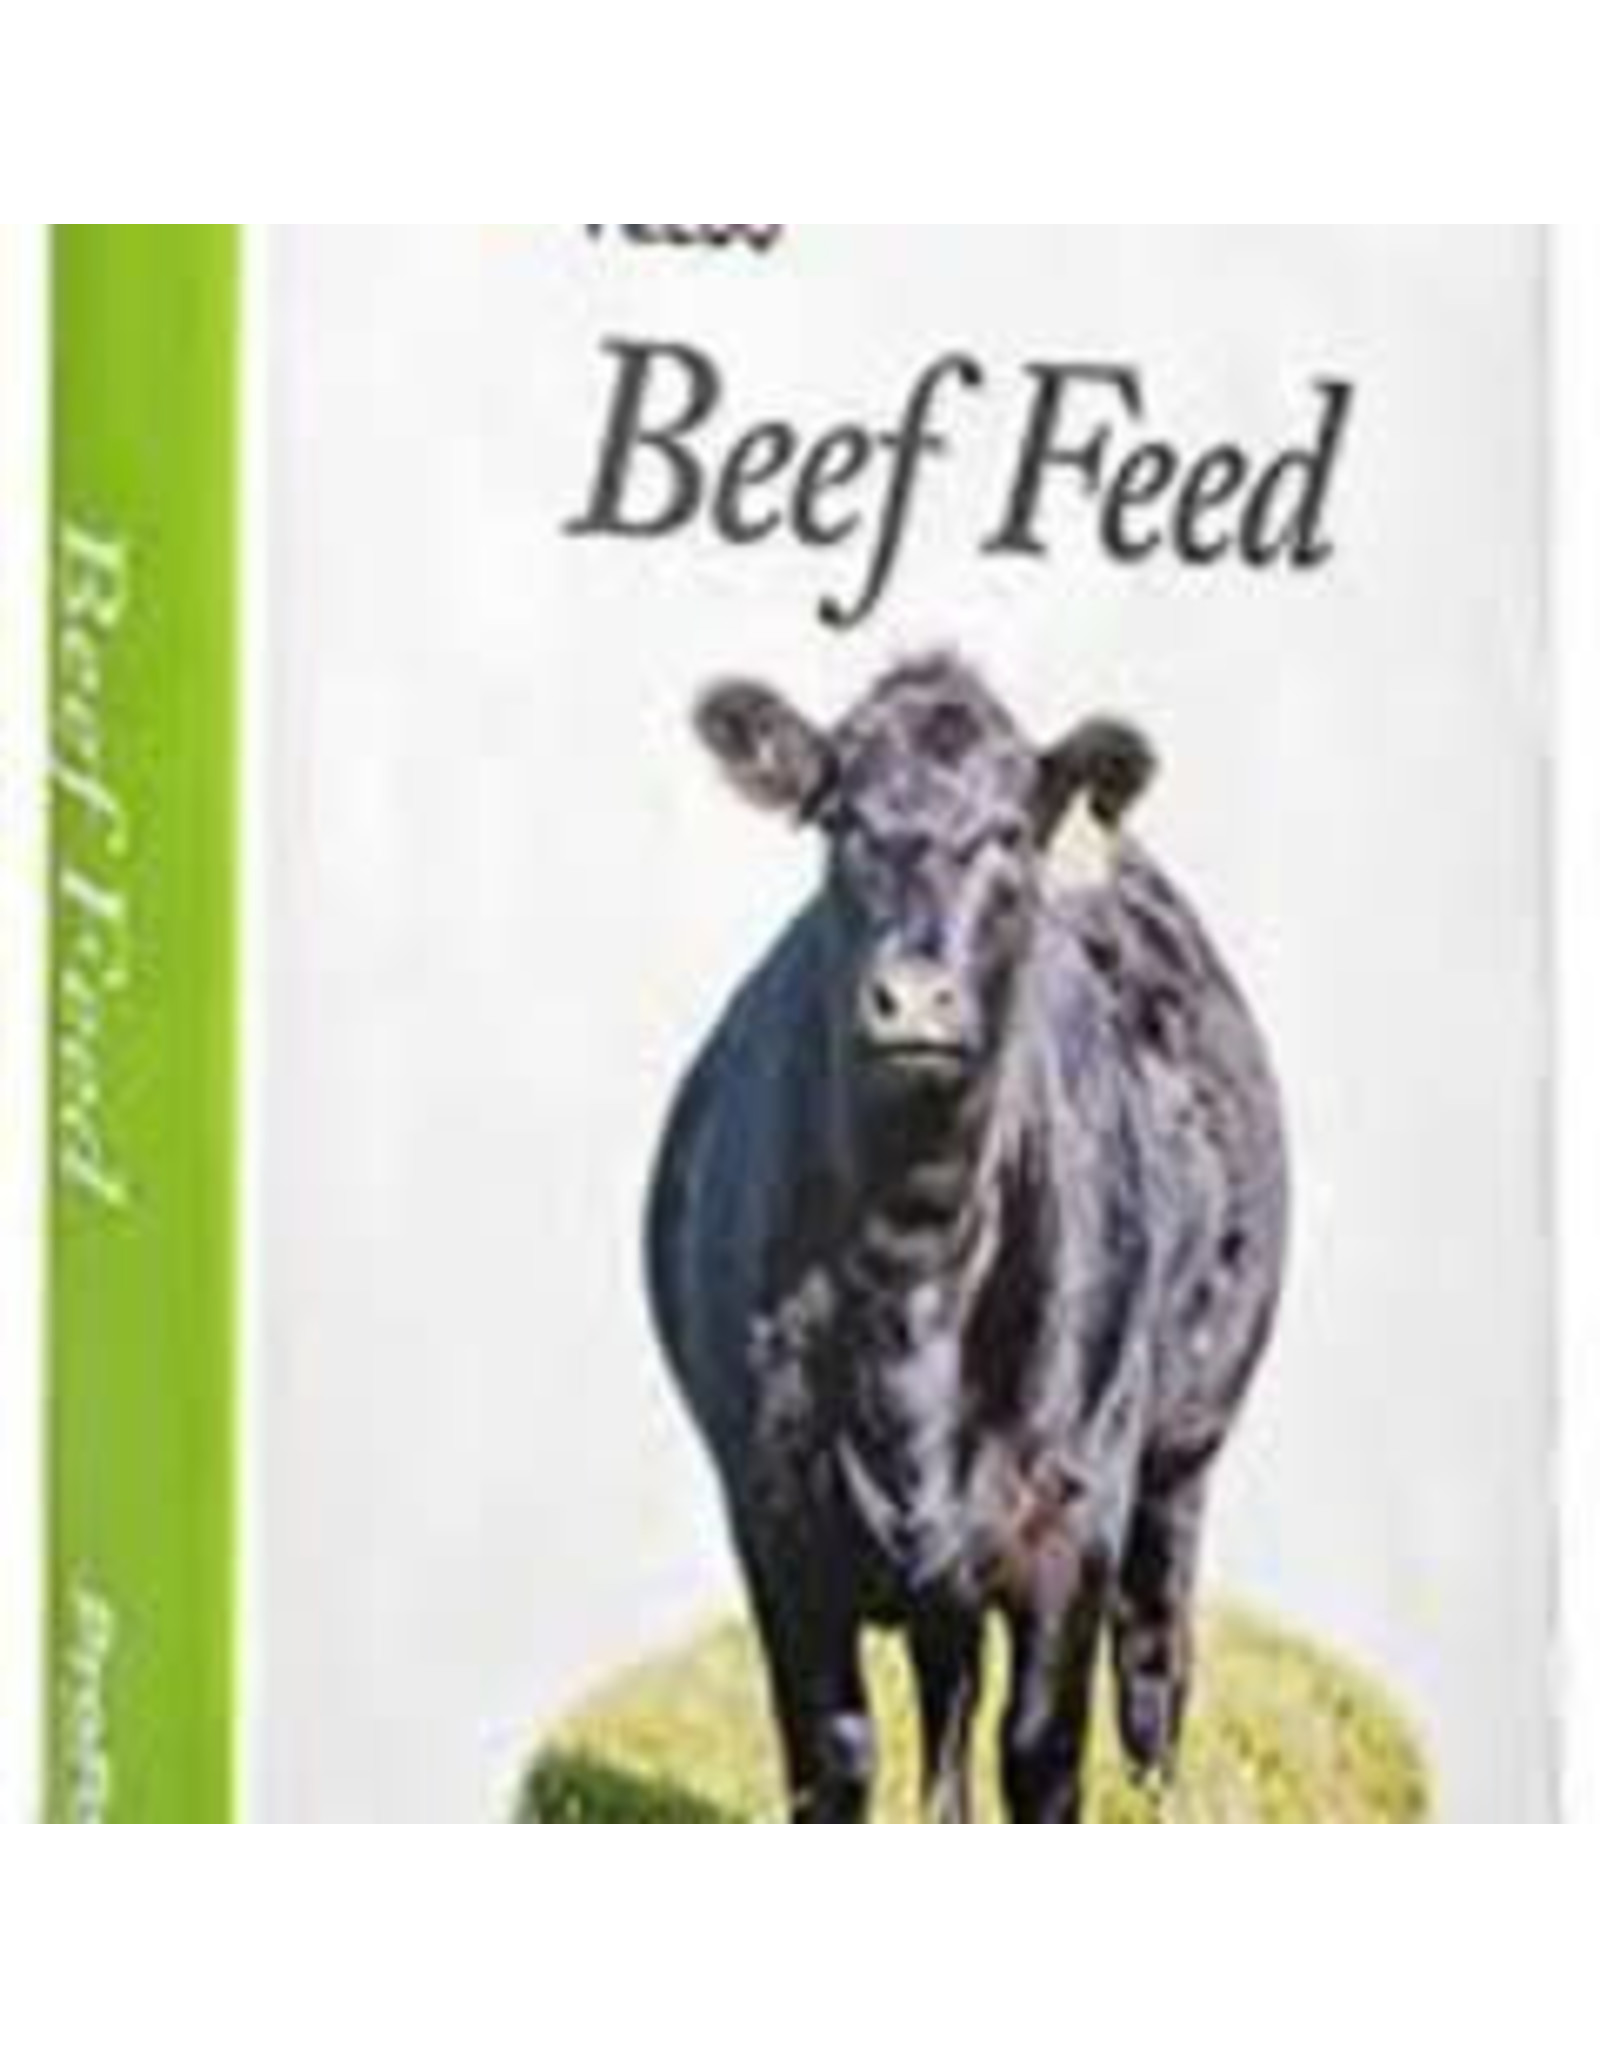 COMPLETE FEED - PRO FORM GROWER/FINISHER 20 KG- NON MEDICATED  - 13333335